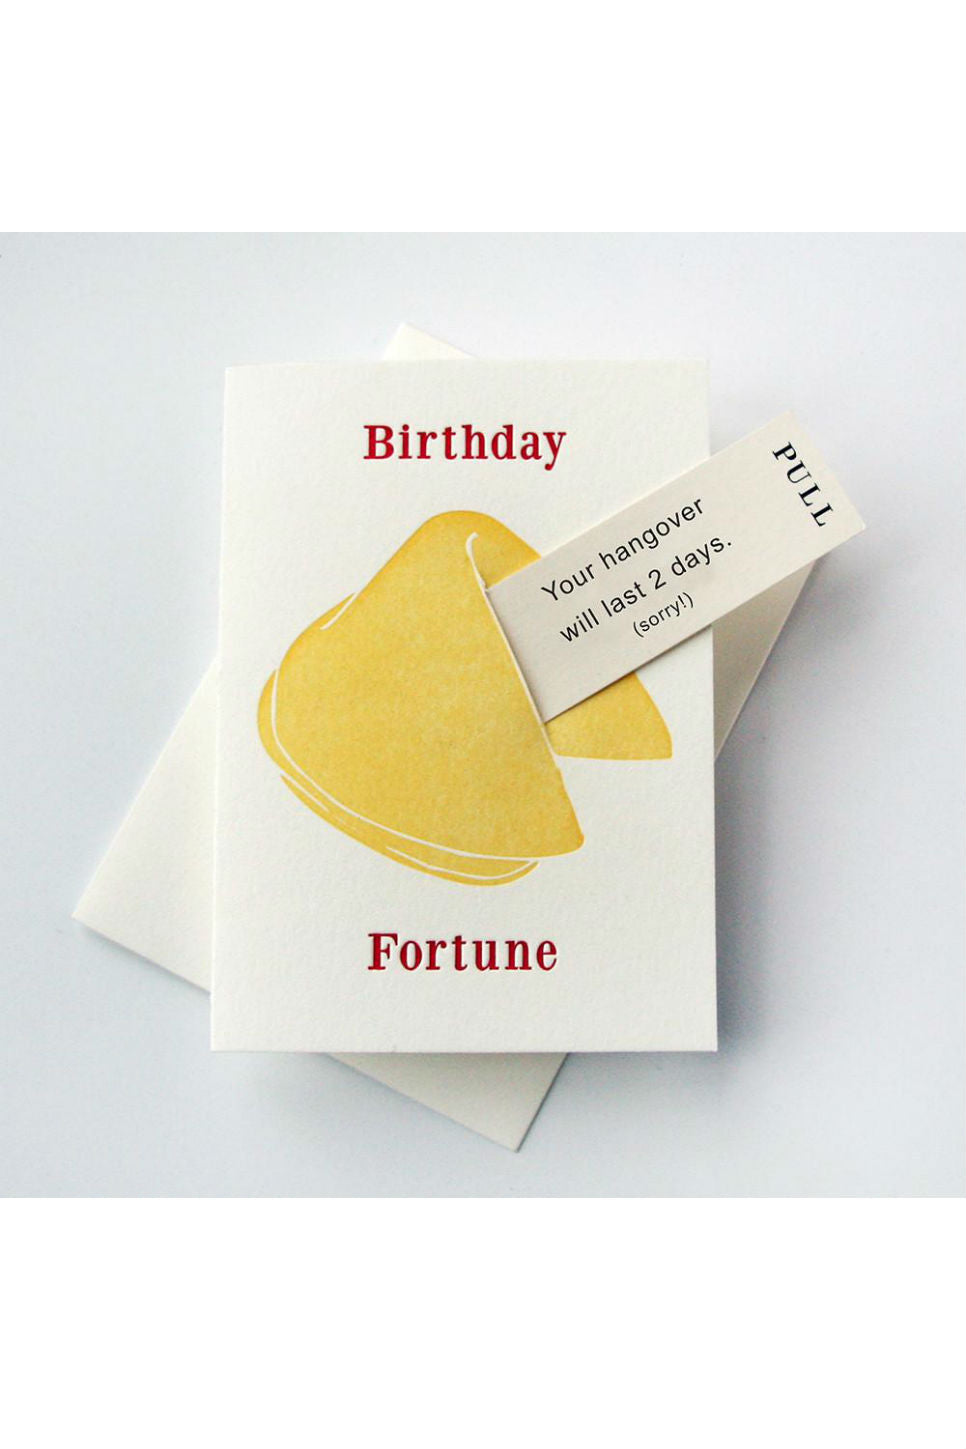 FORTUNE BDAY HANGOVER CARD